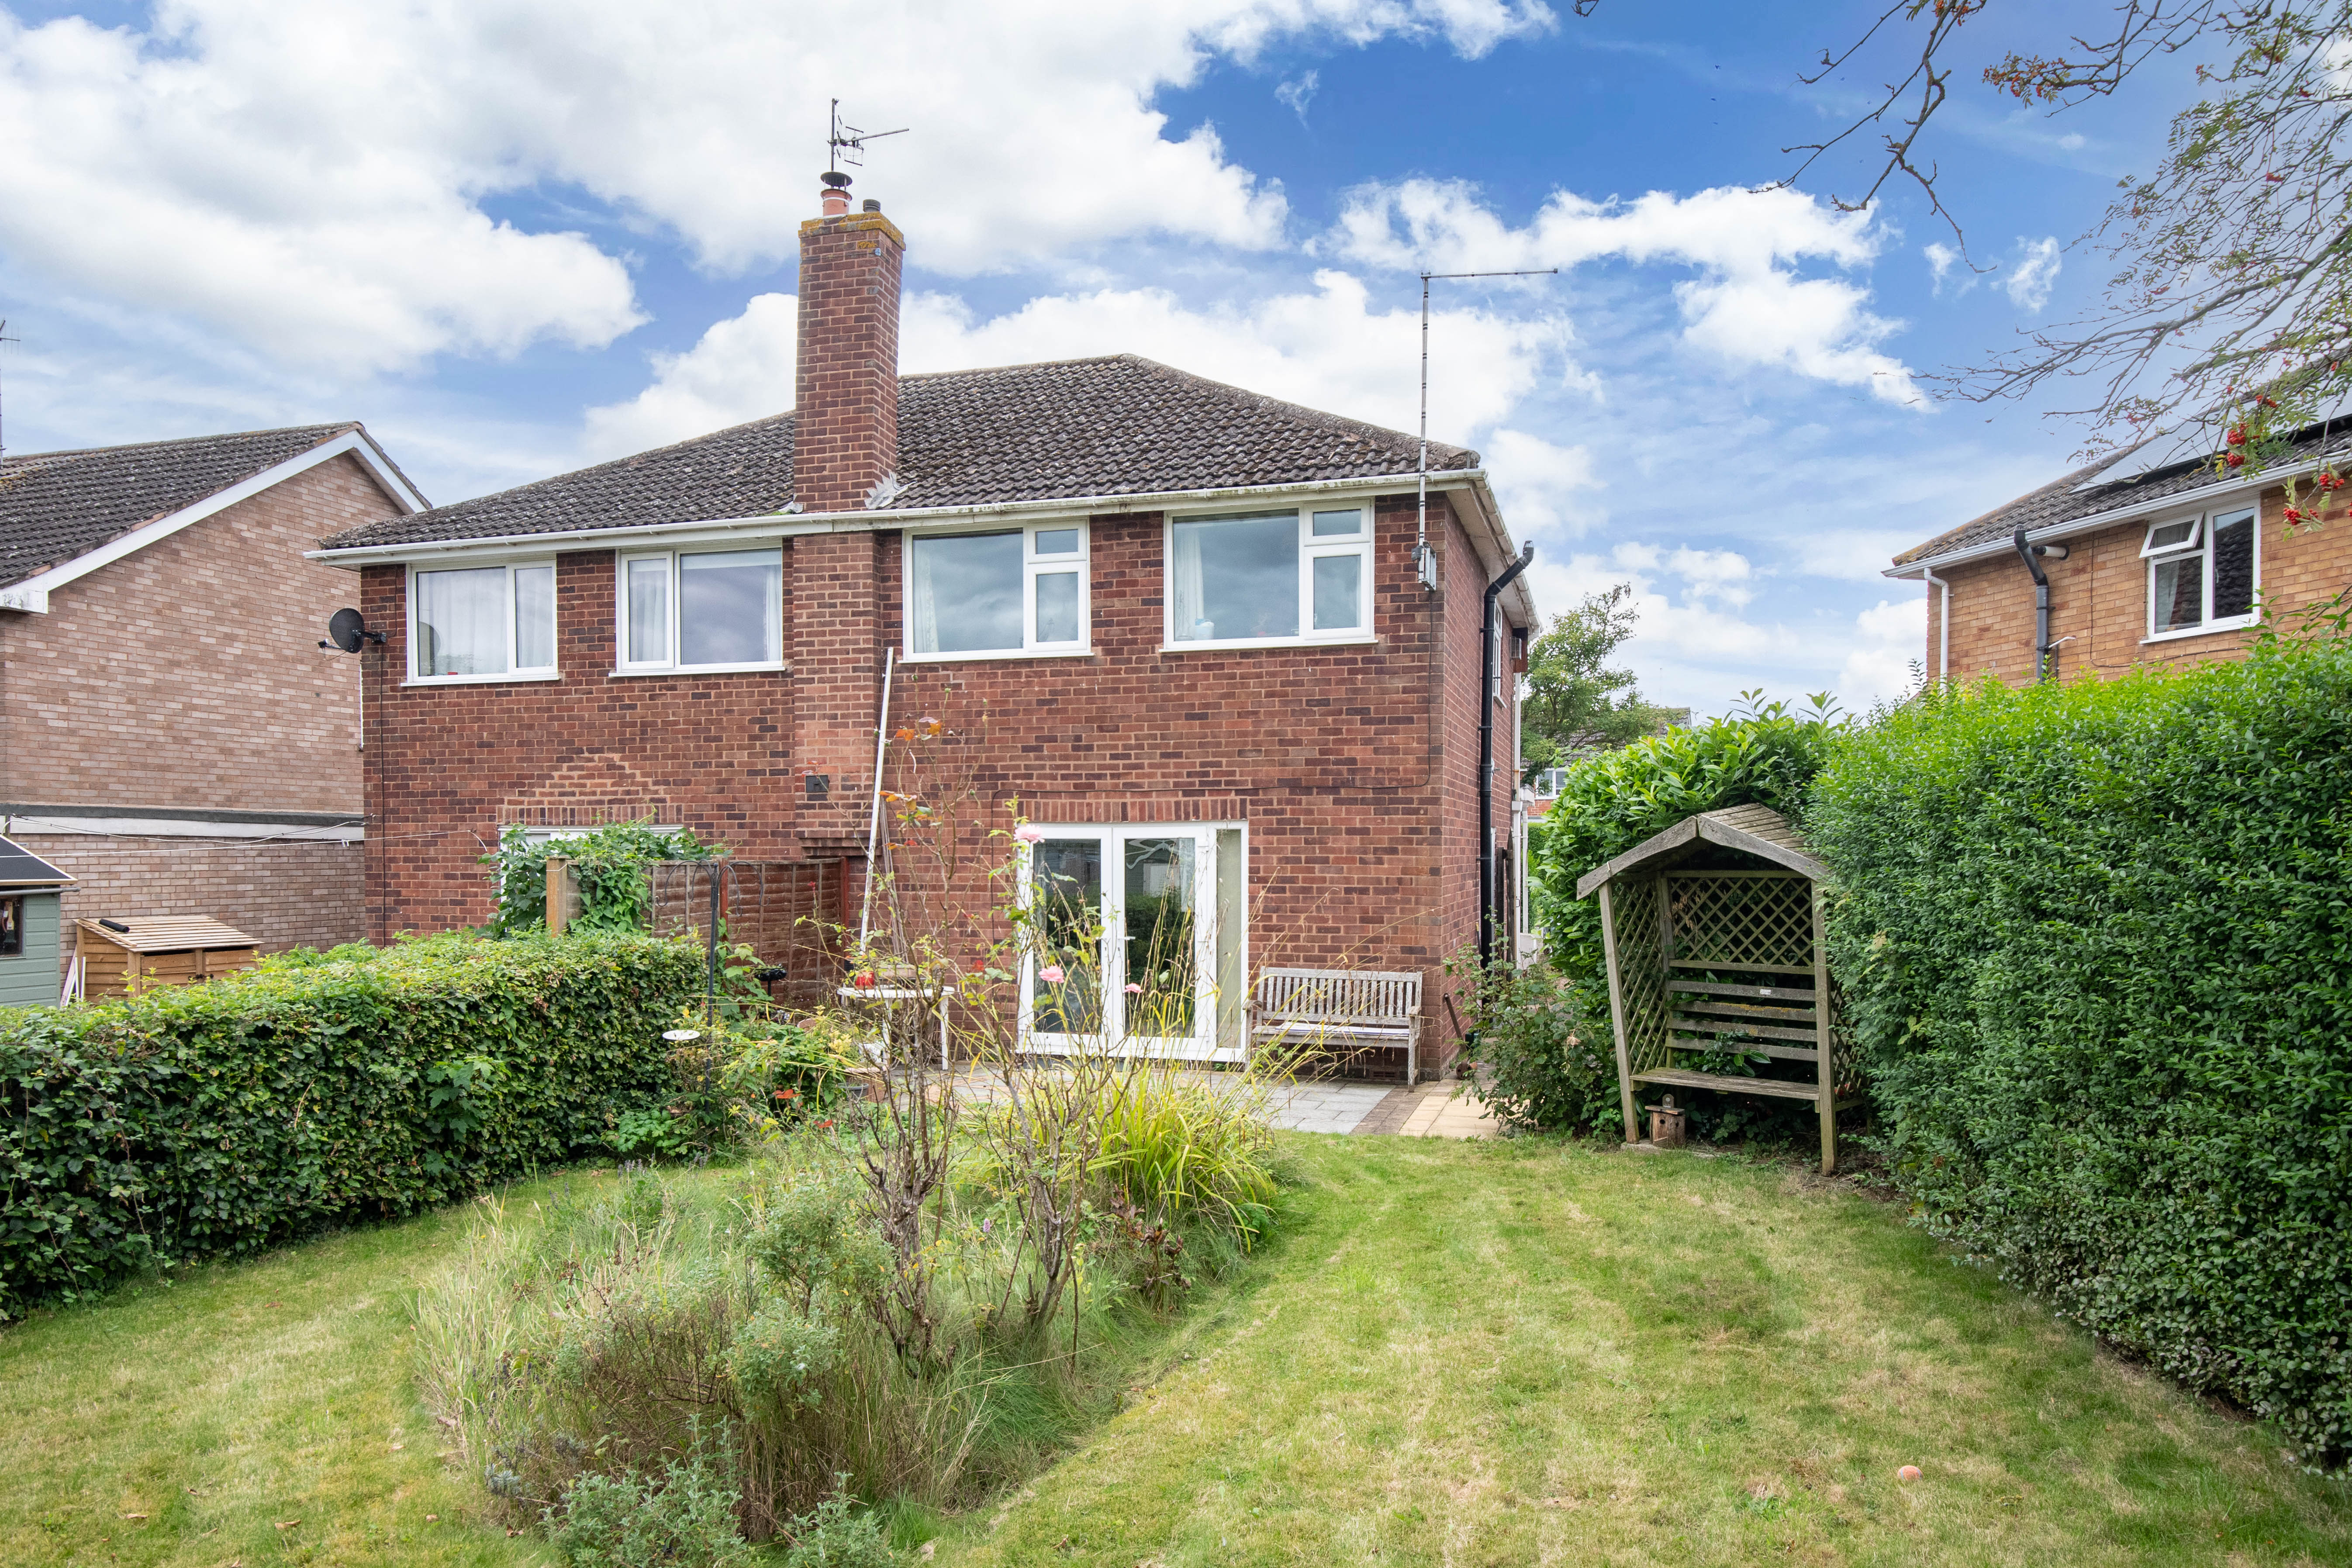 3 bed house for sale in Cloverdale, Stoke Prior 13